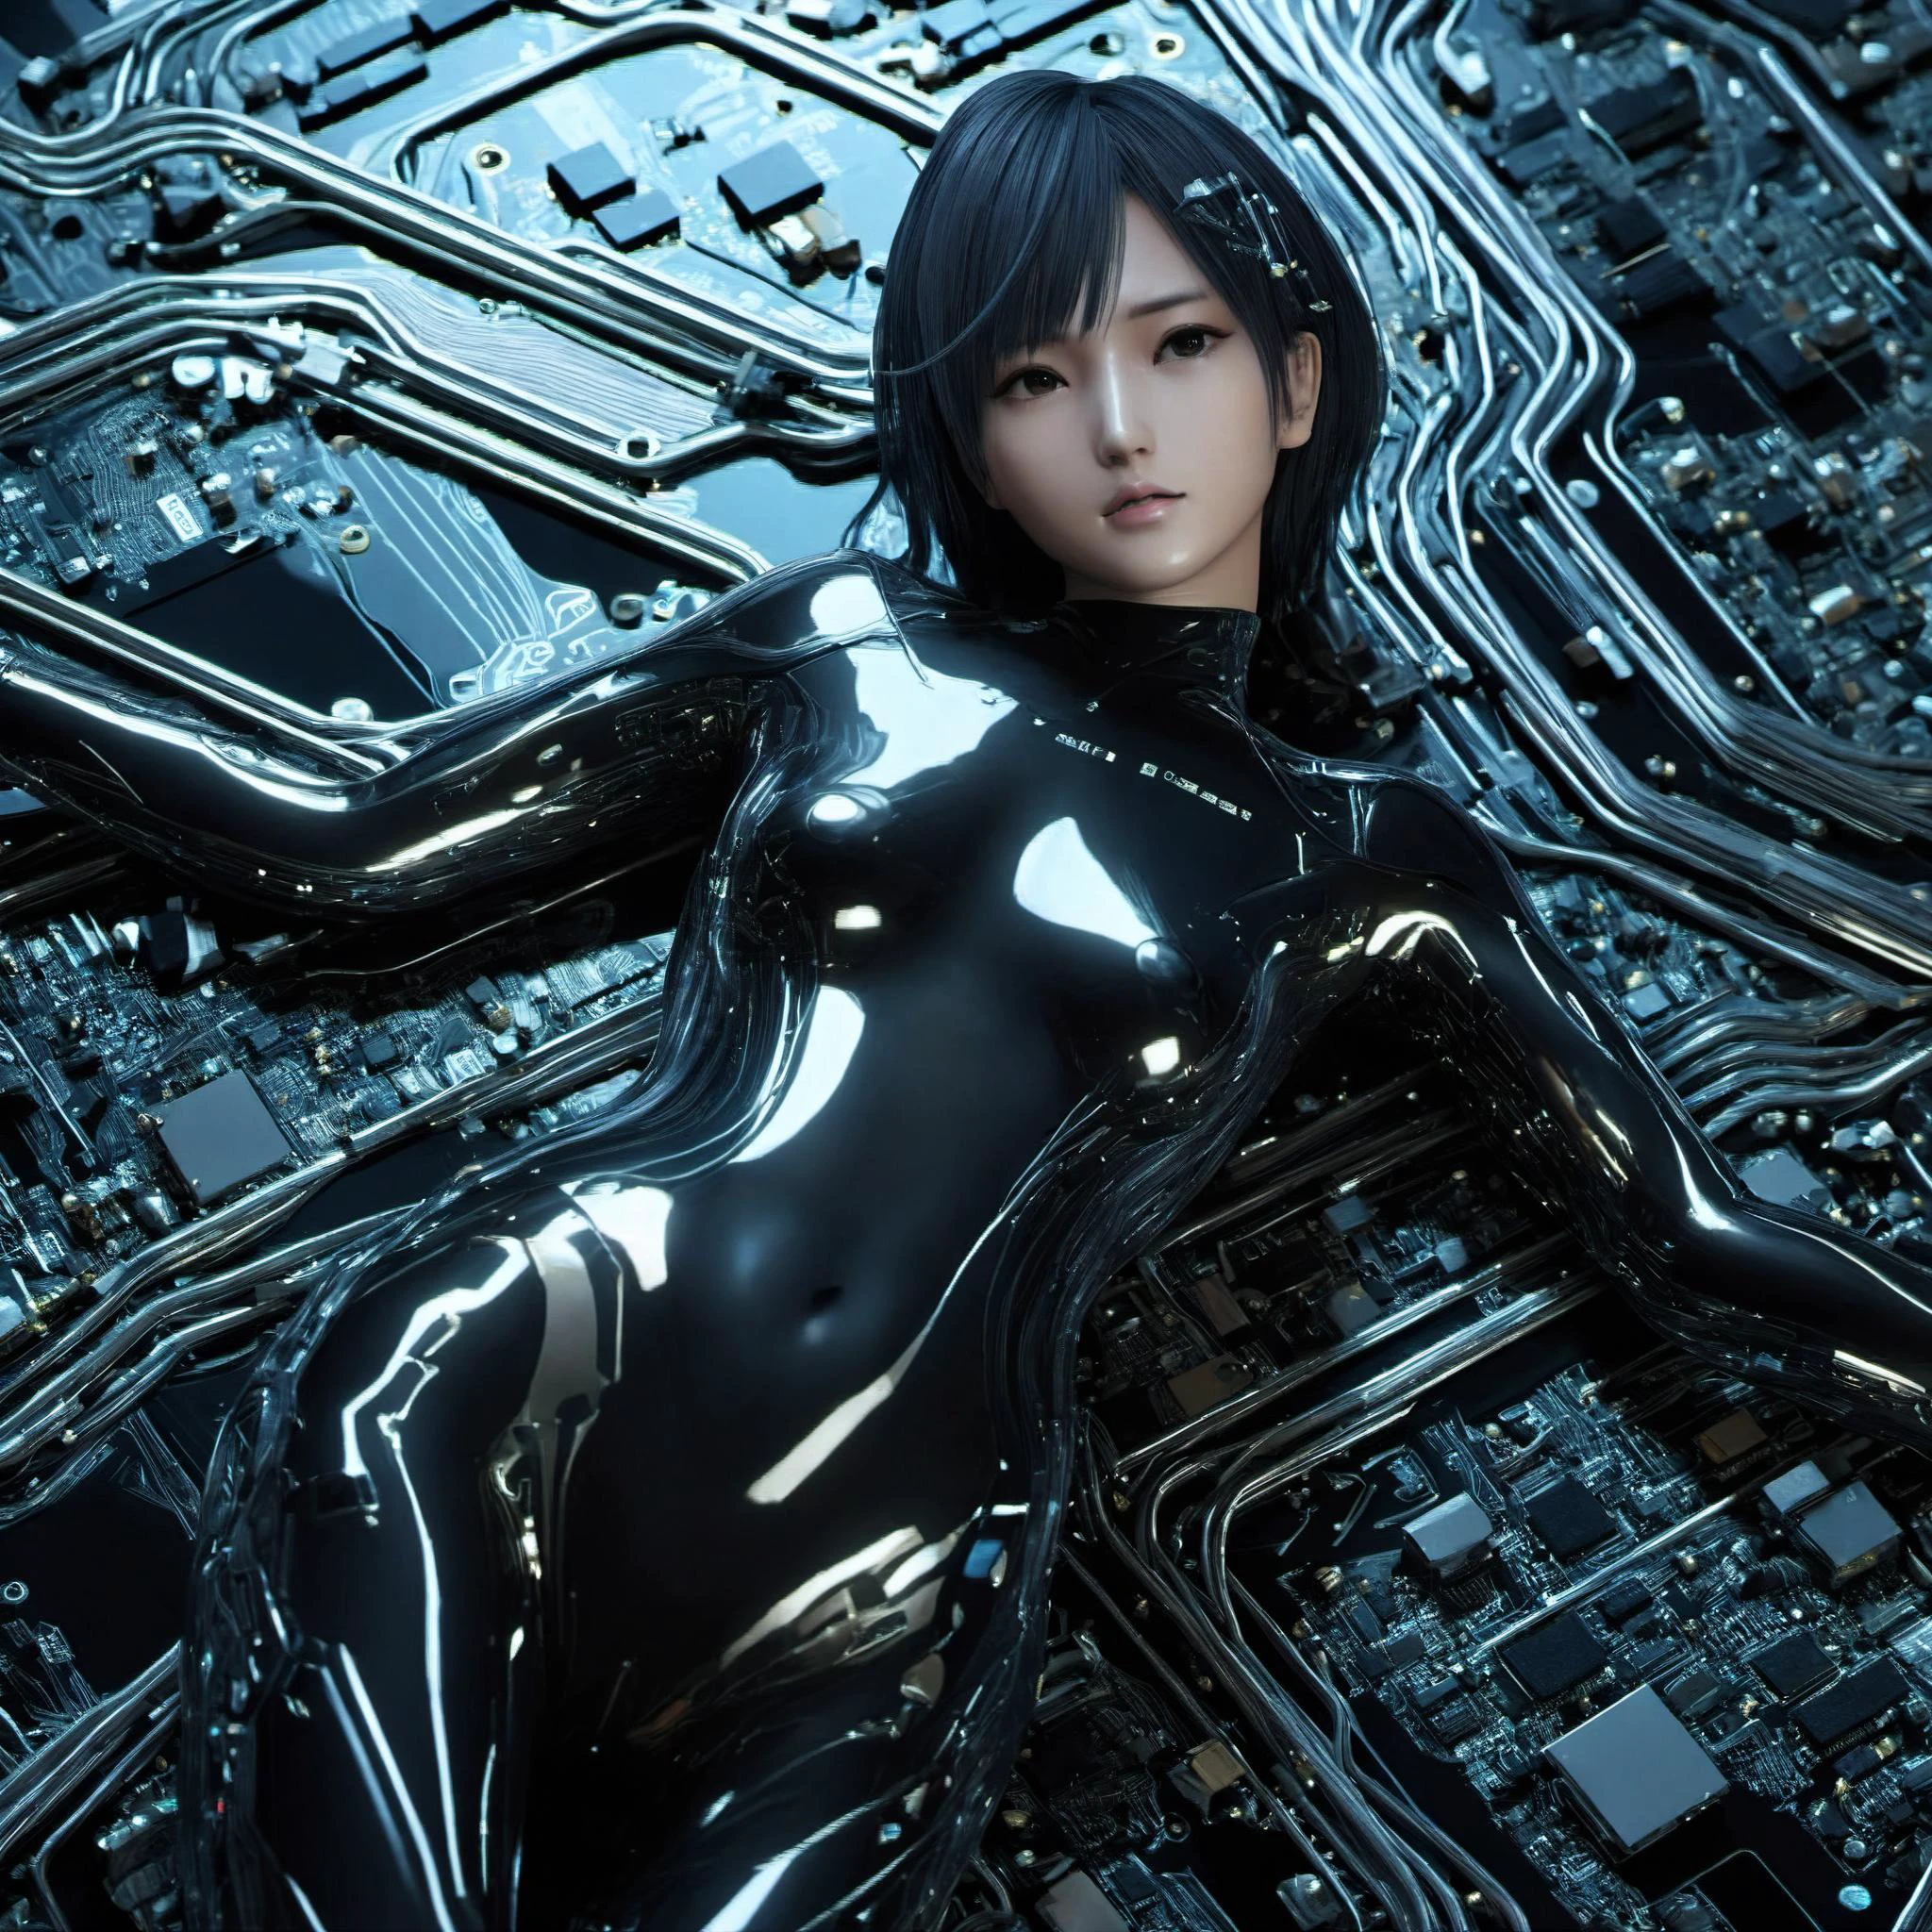 masterpiece, best quality, 1girl named nagisa, in a more dynamic, graceful pose, Dark_Futuristic_Circuit_Boards background, half-body, from above, lying on the board,  bodysuit made of chrome, movie still, ciematic, 